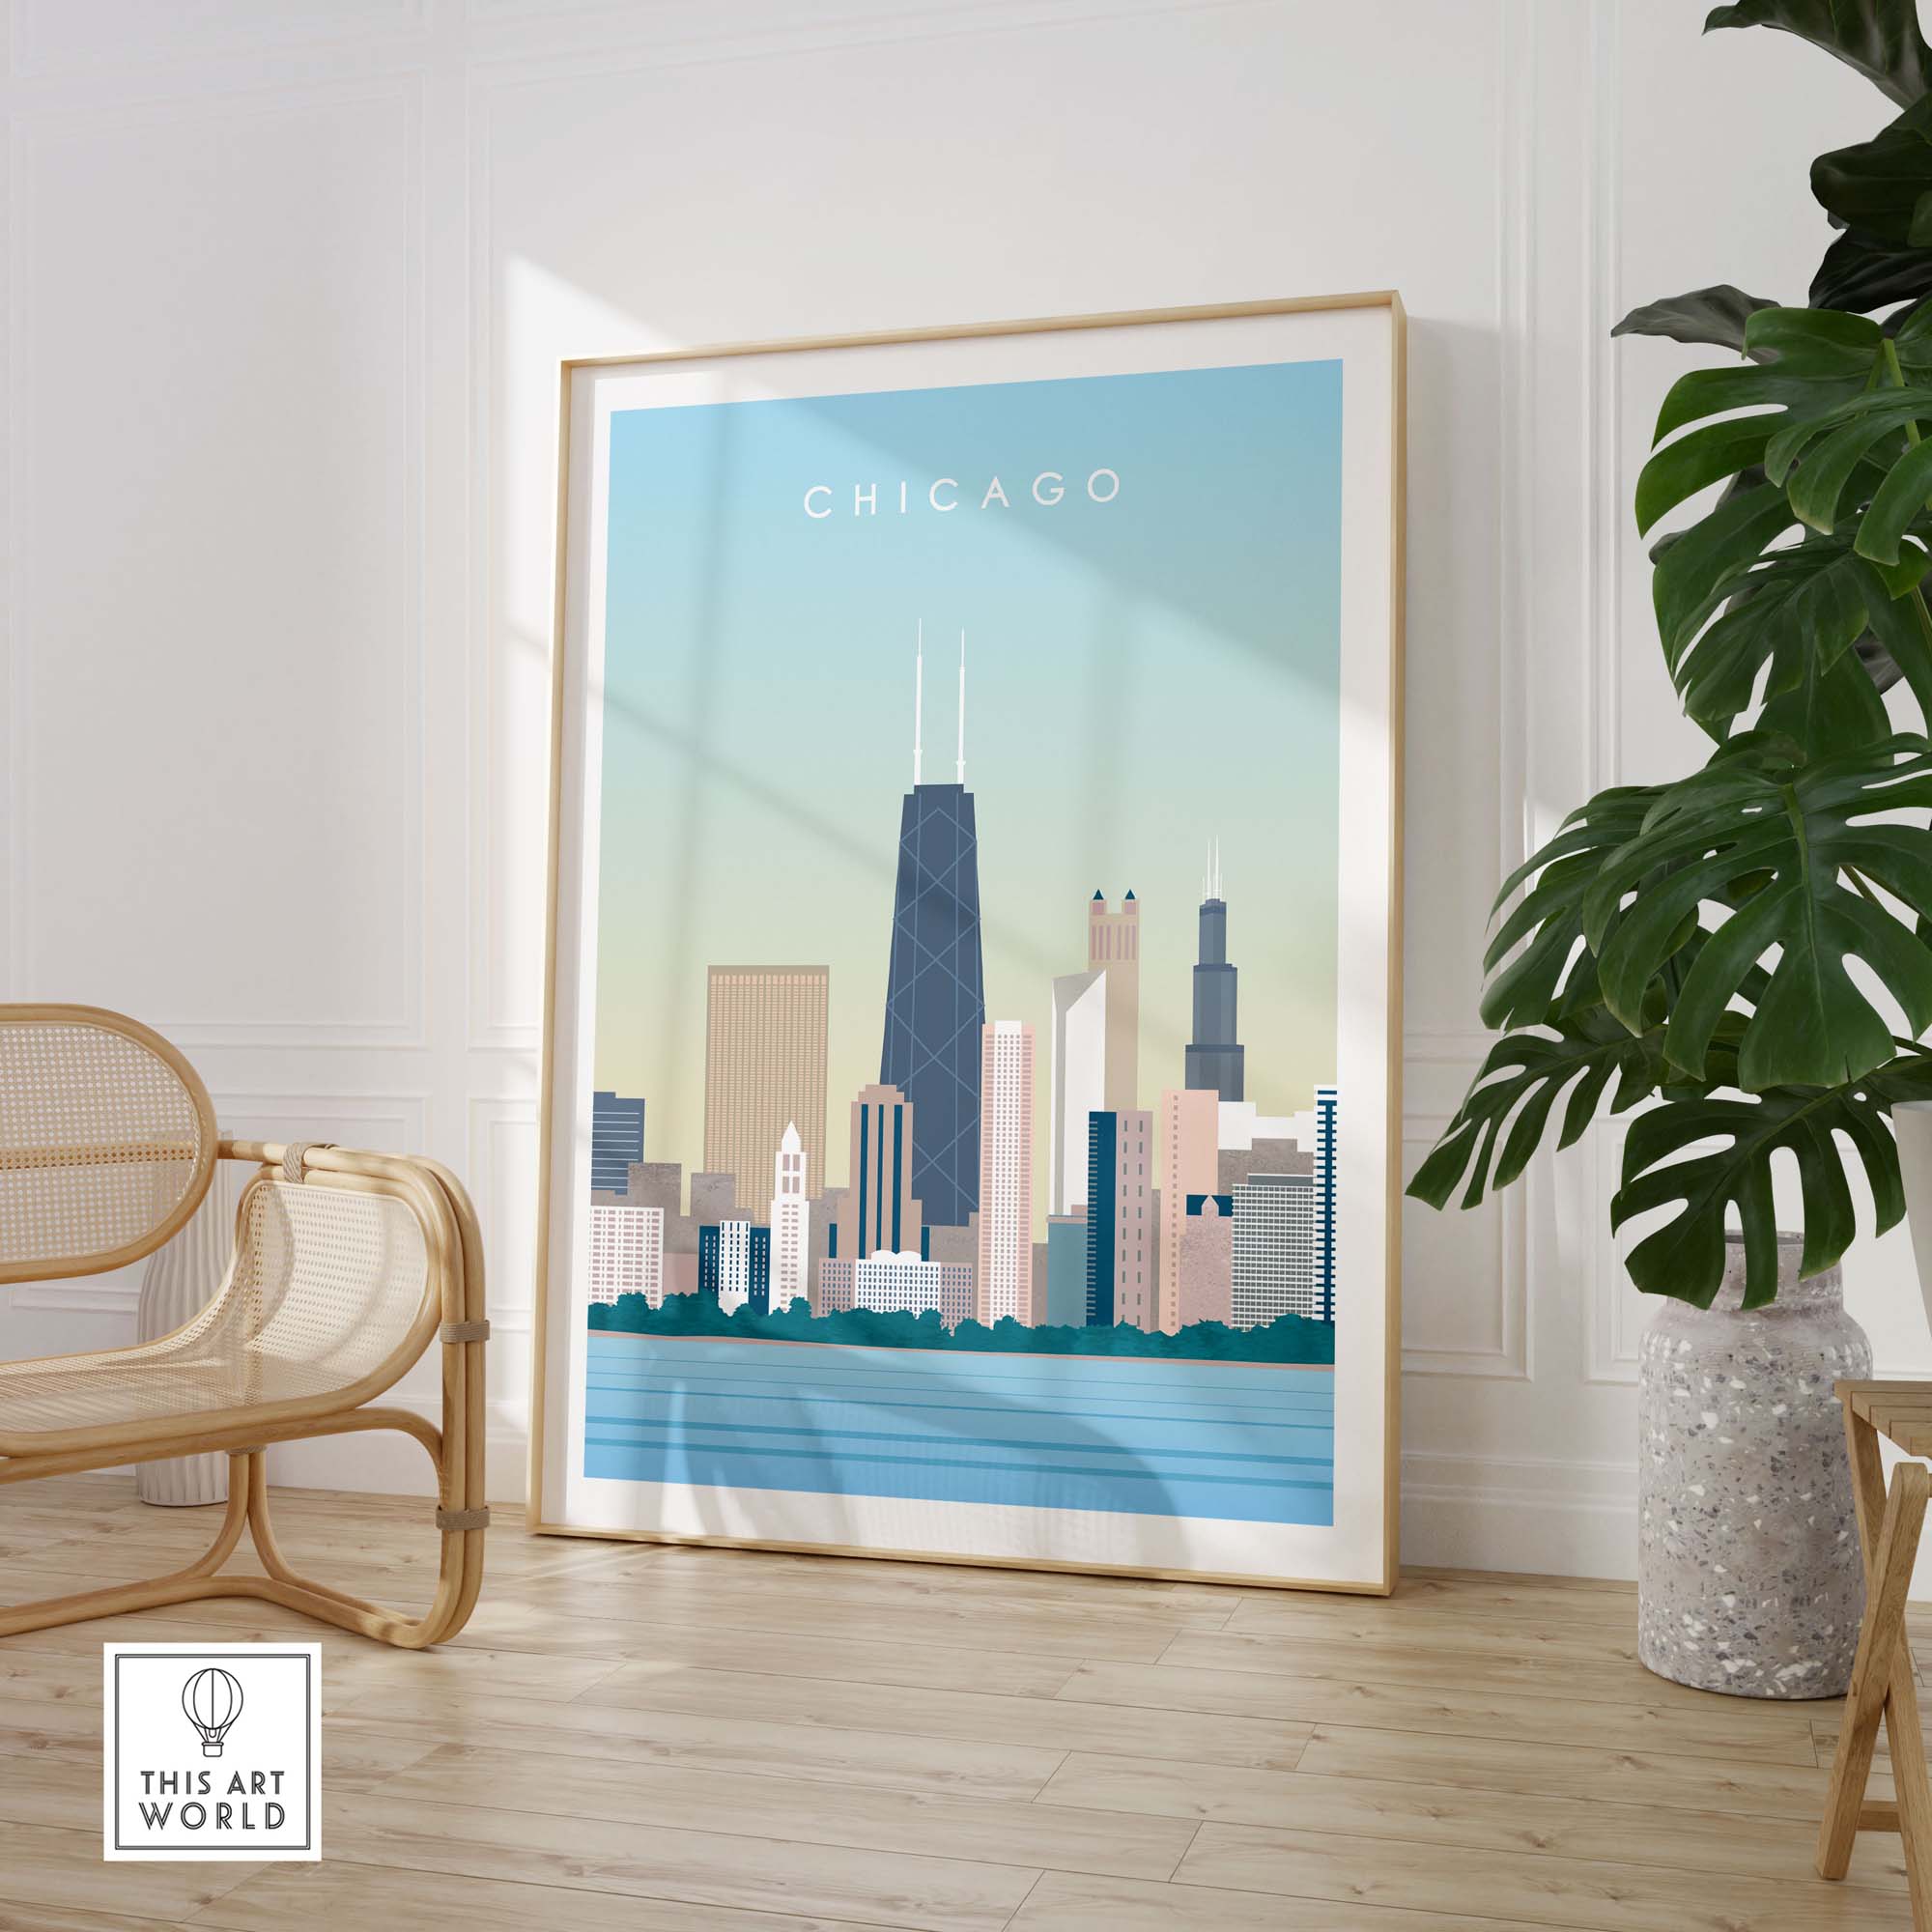 Chicago Print Wall Art Poster